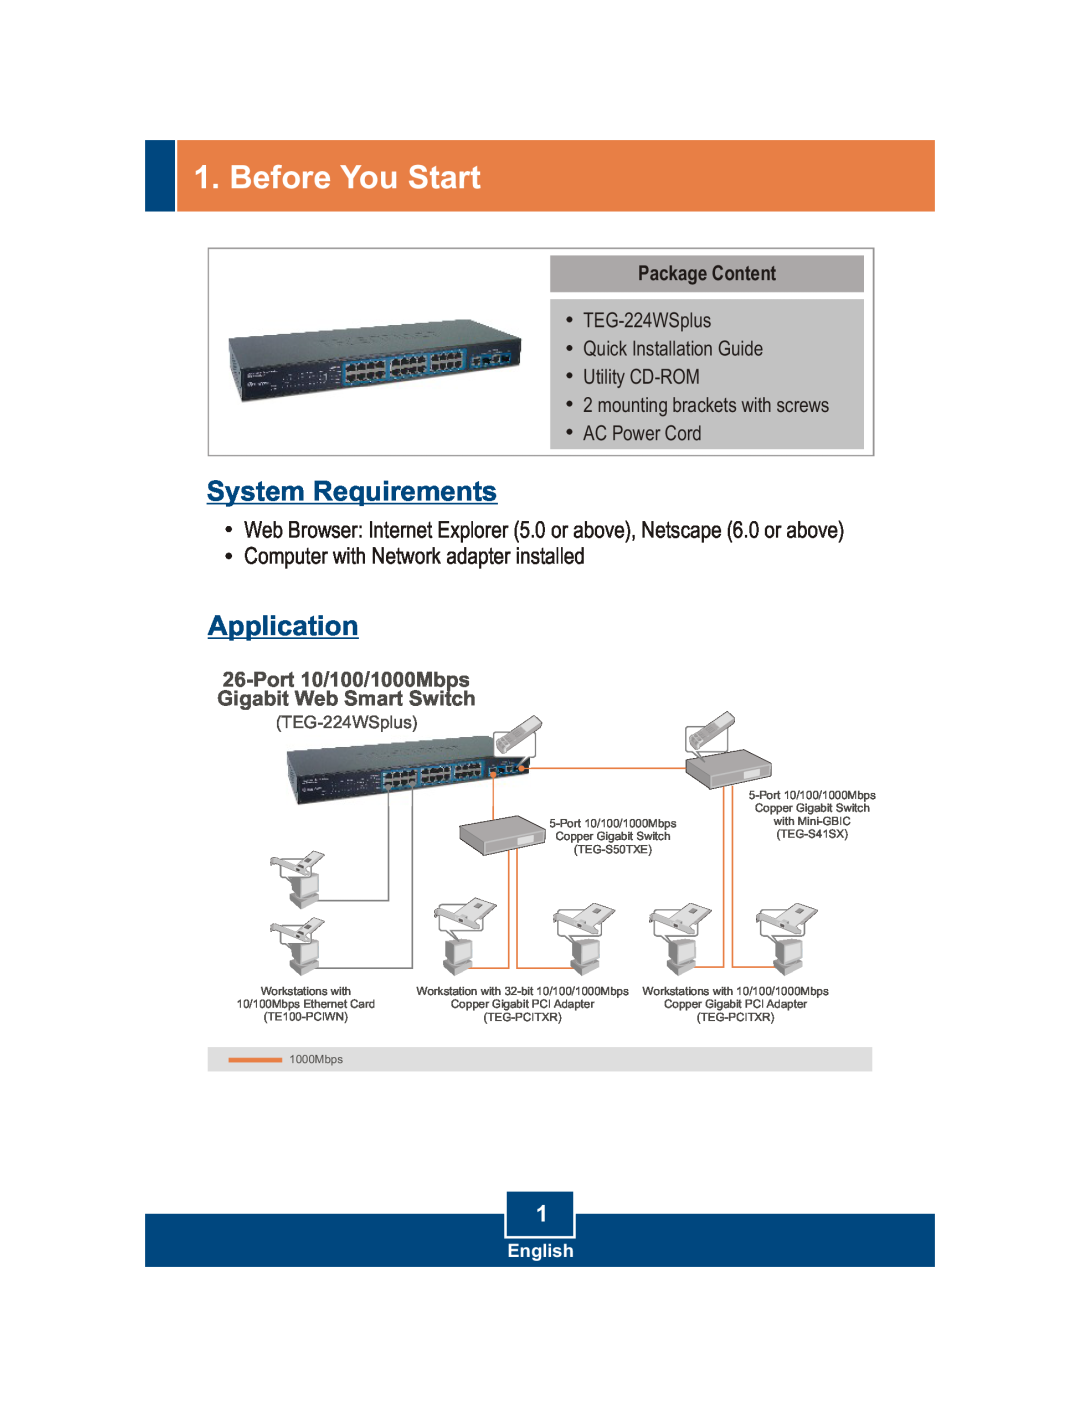 TRENDnet manual Before You Start, System Requirements, Application, Package Content, English, TEG-224WSplus, 1000Mbps 